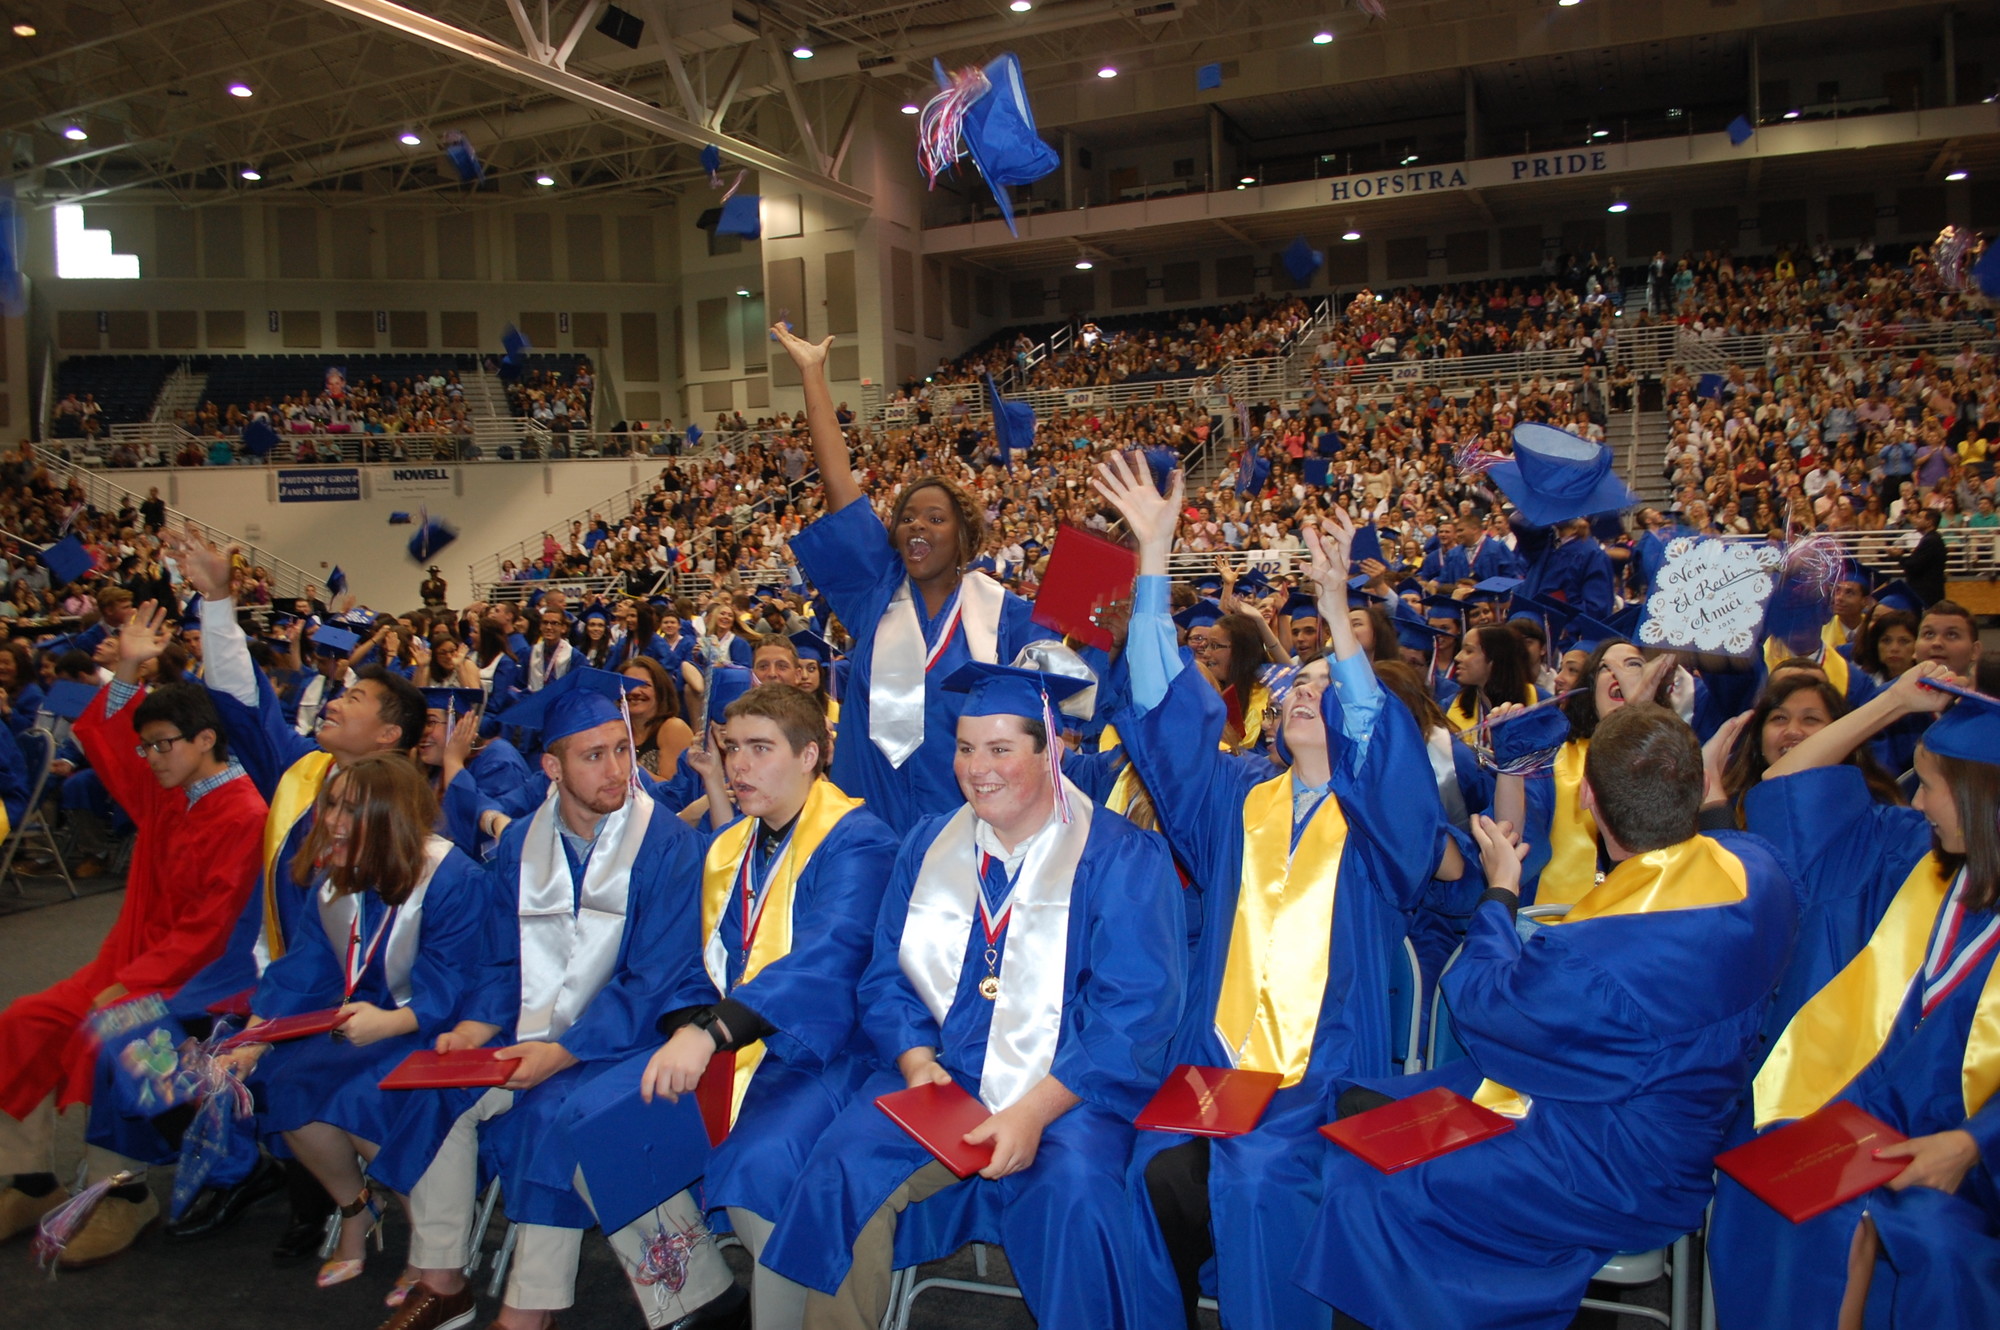 MacArthur seniors cheered after the last diploma was handed out and they were officially declared graduates at last Saturday afternoon’s ceremony at Hofstra University.